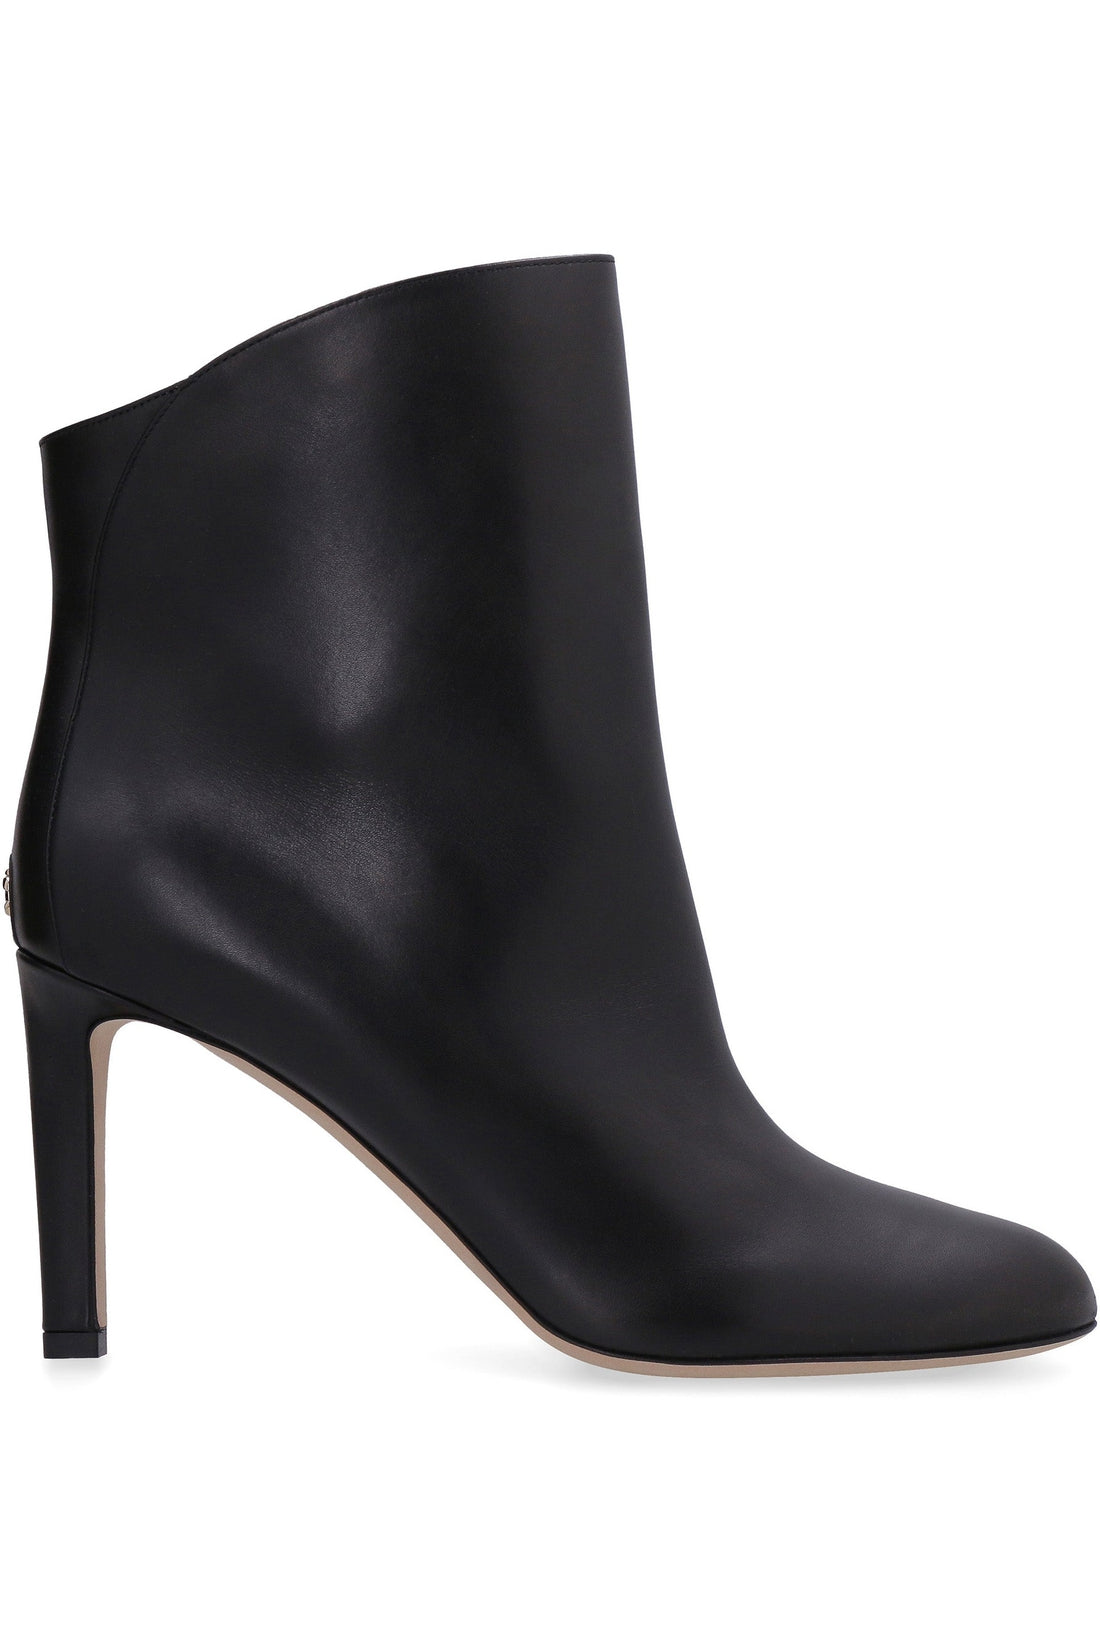 Jimmy Choo-OUTLET-SALE-Karter leather ankle boots-ARCHIVIST